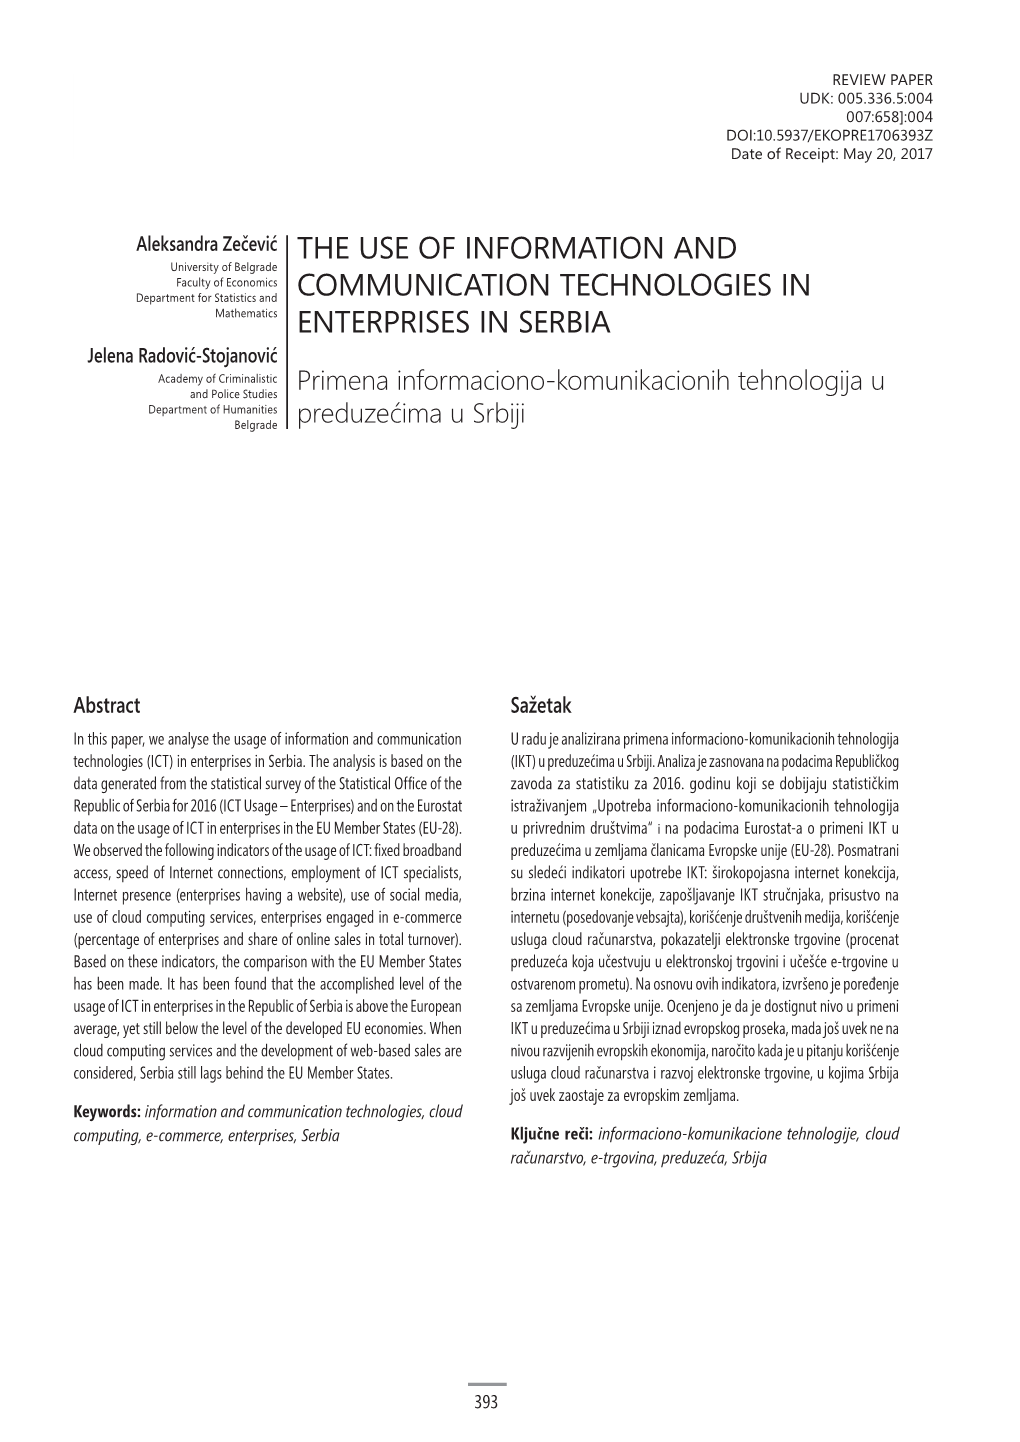 The Use of Information and Communication